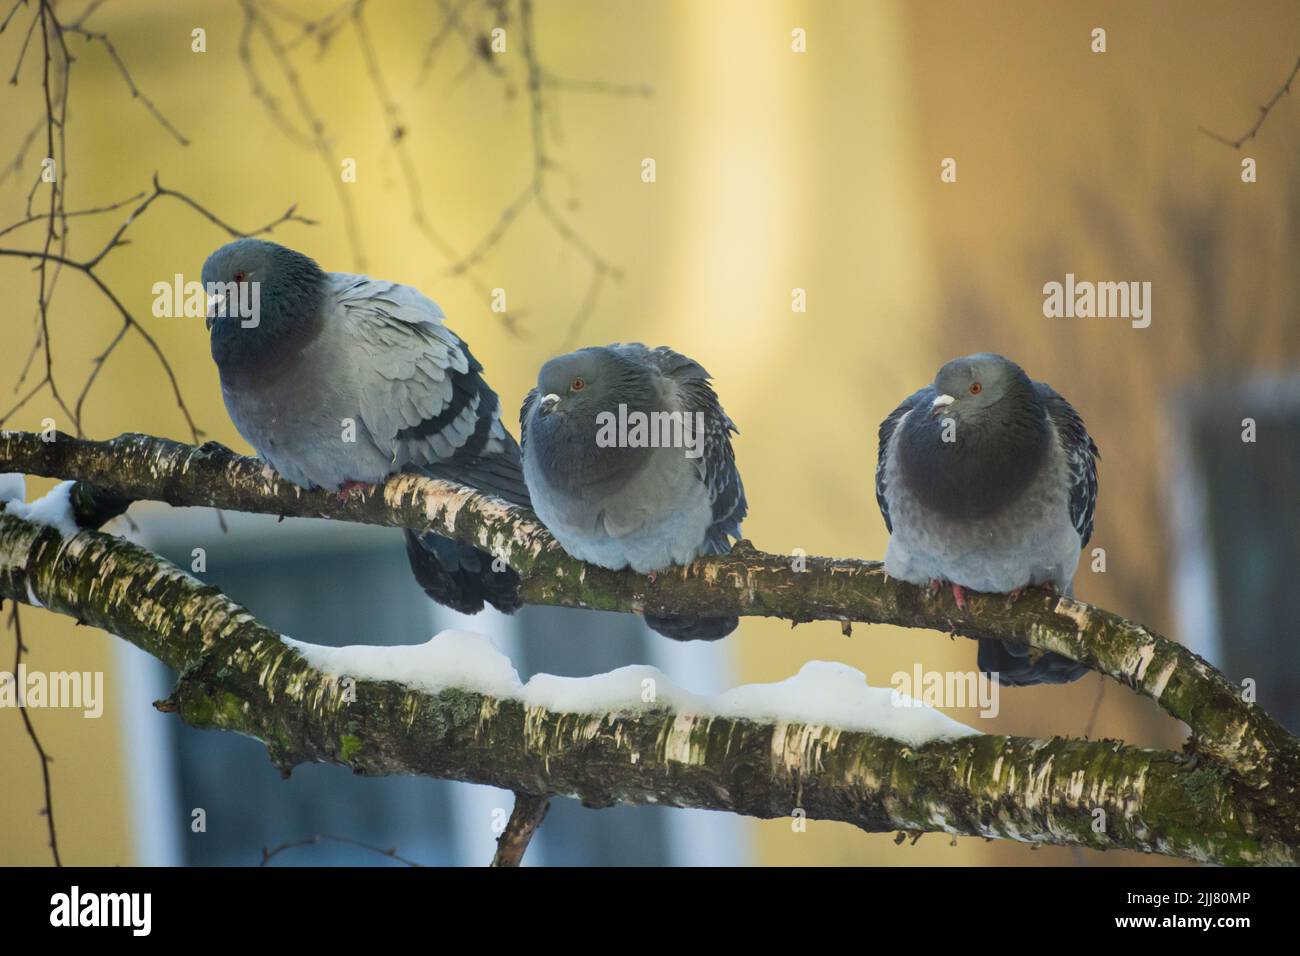 Urban pigeons sitting on a tree branch, winter view Stock Photo